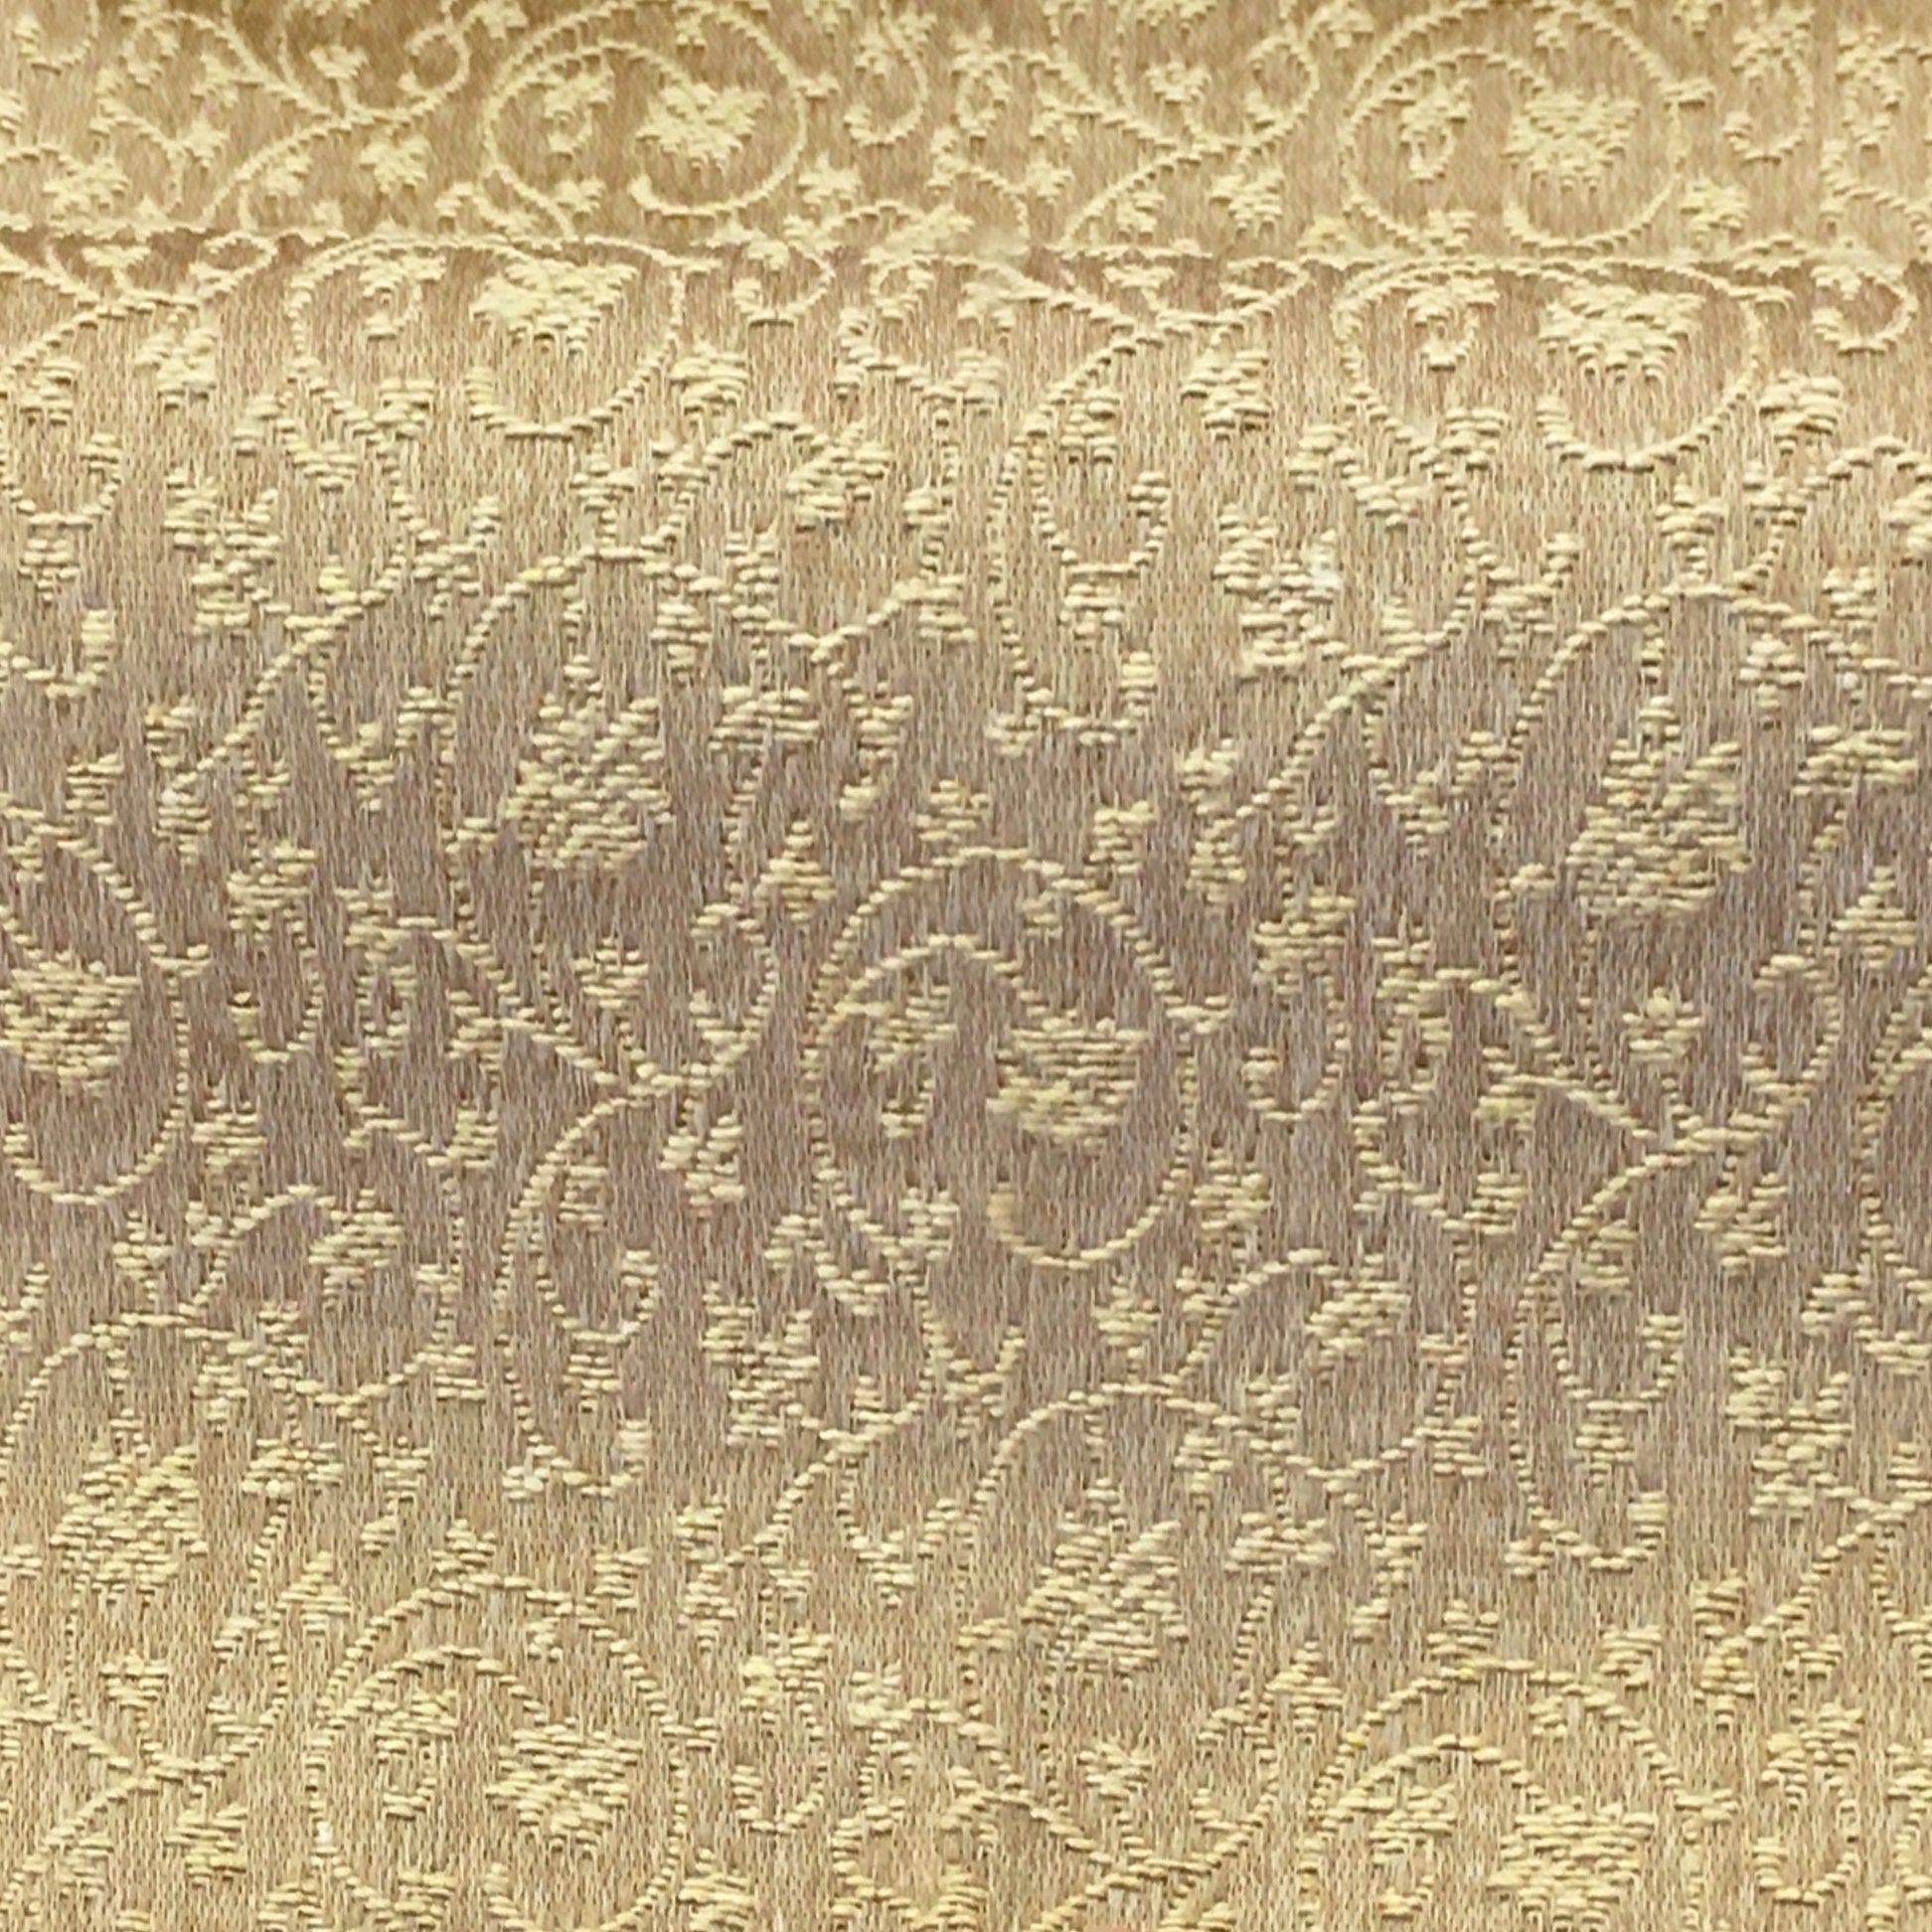 Floral Jacquard Satin Fabric Gold by the Yard – ALOHALACE